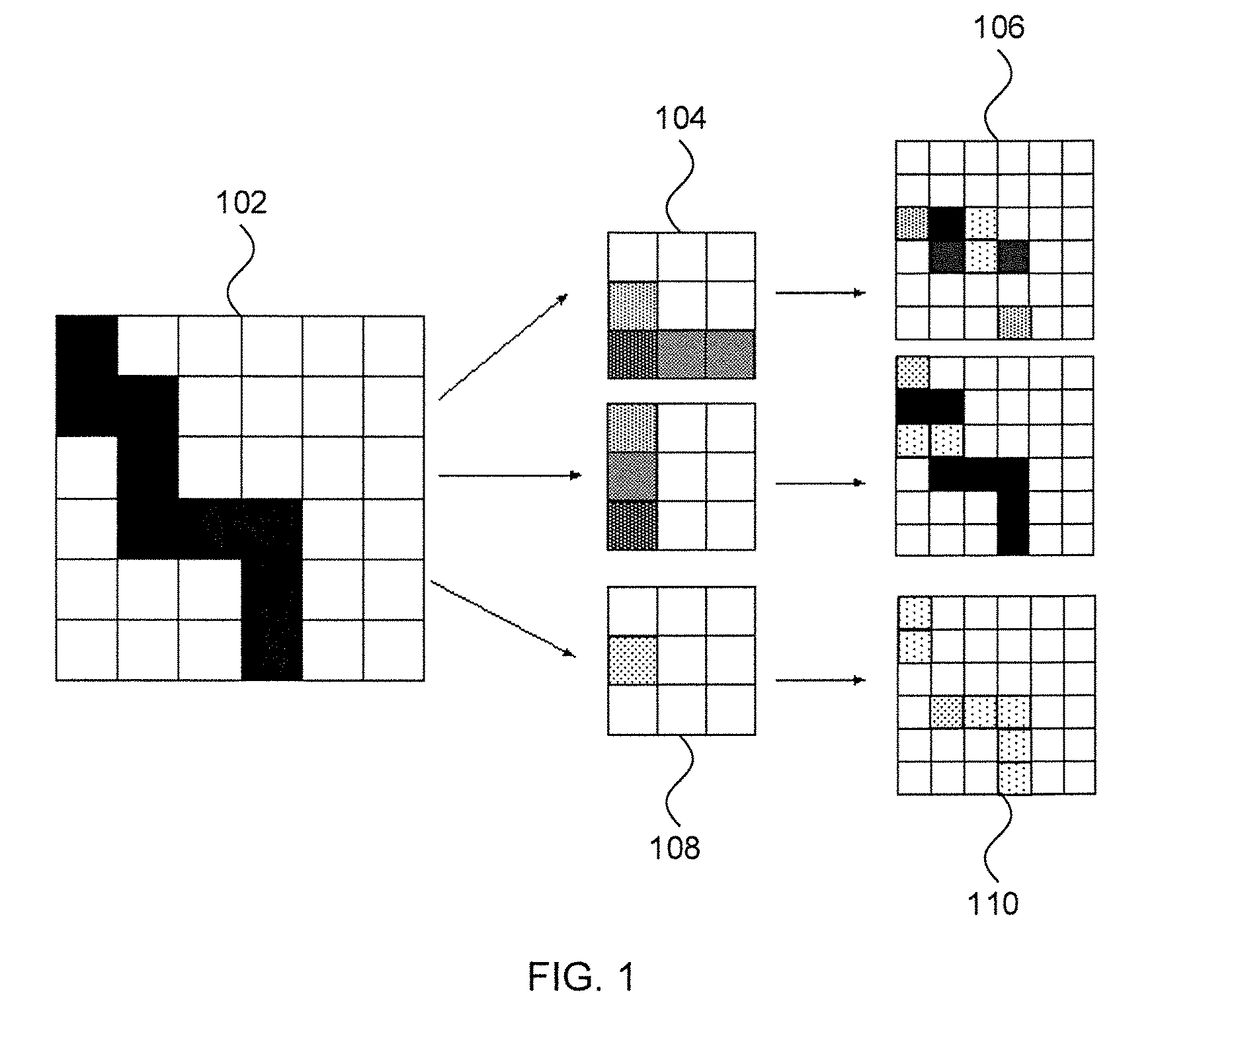 Passive pruning of filters in a convolutional neural network